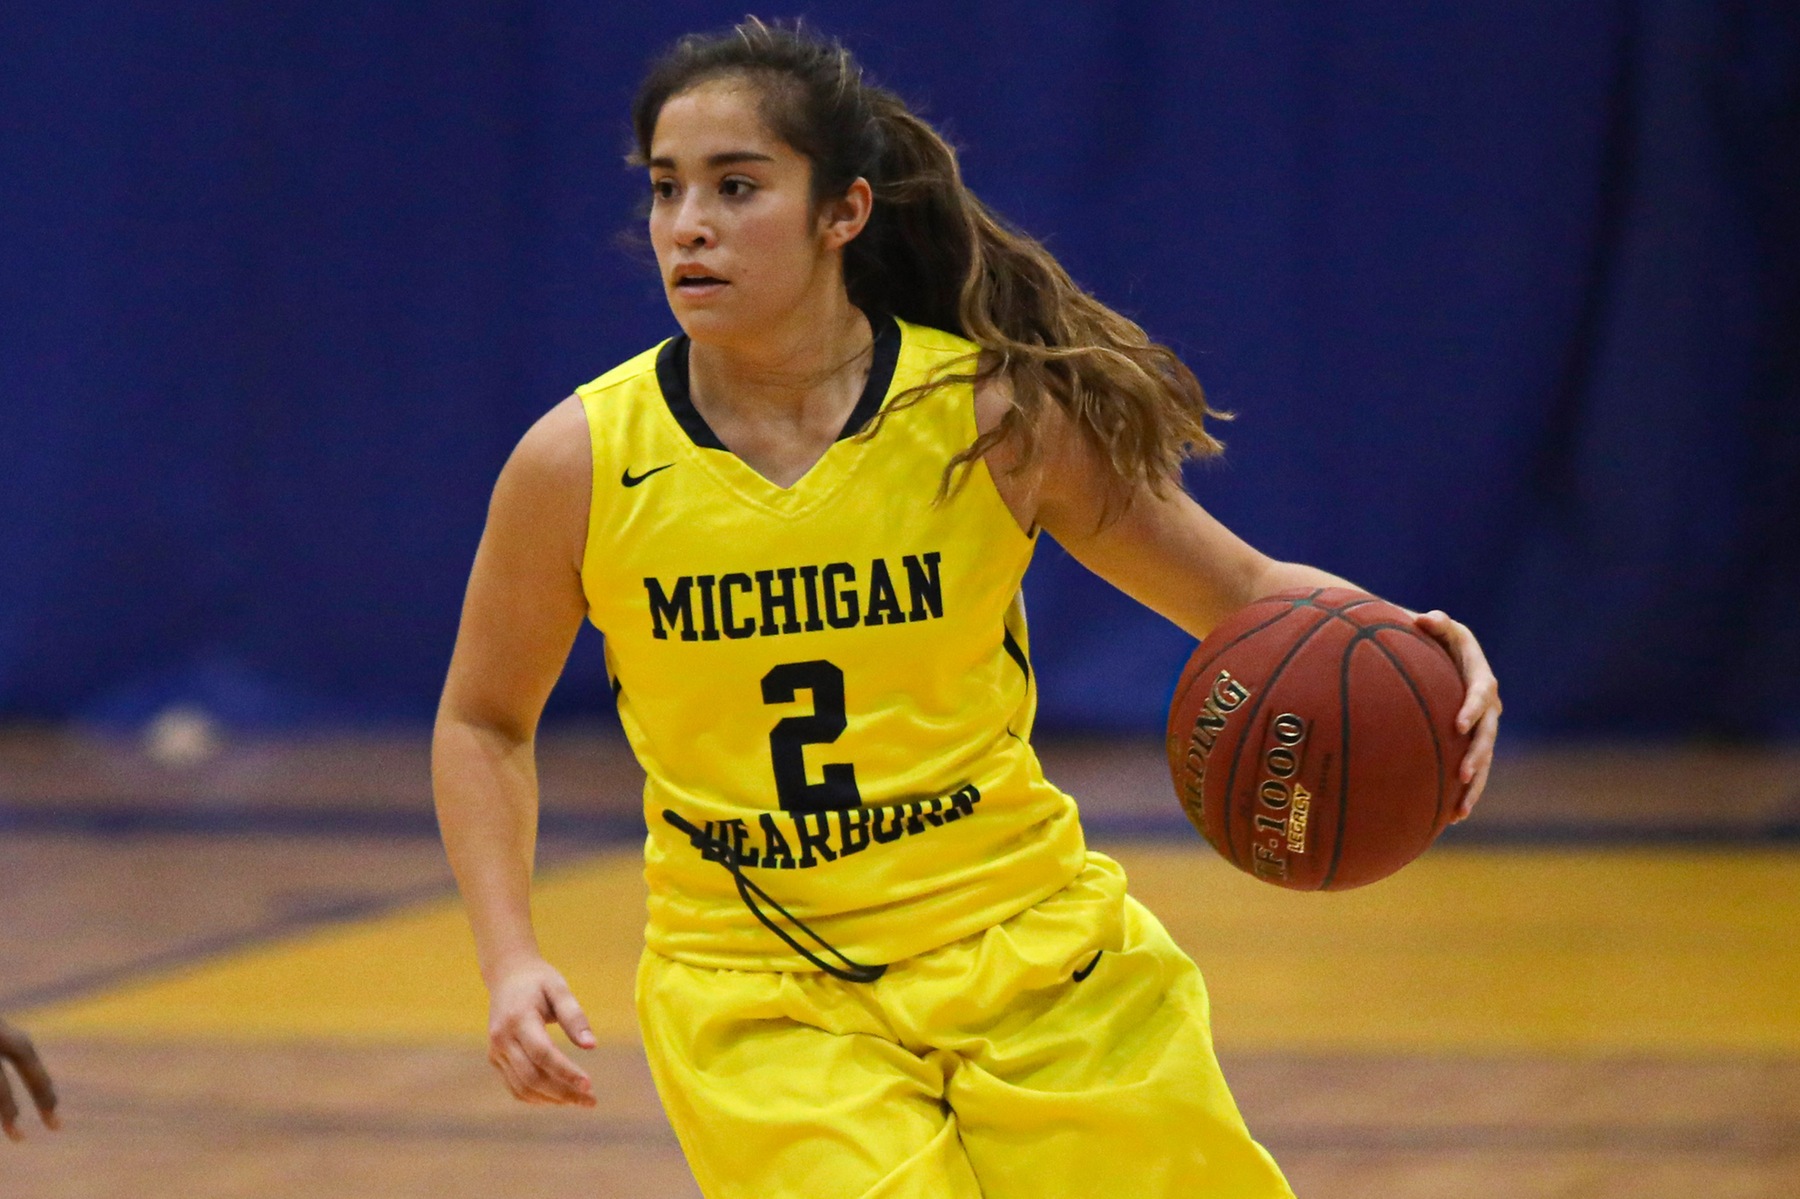 Wolverines take down Crusaders to keep pace in WHAC standings